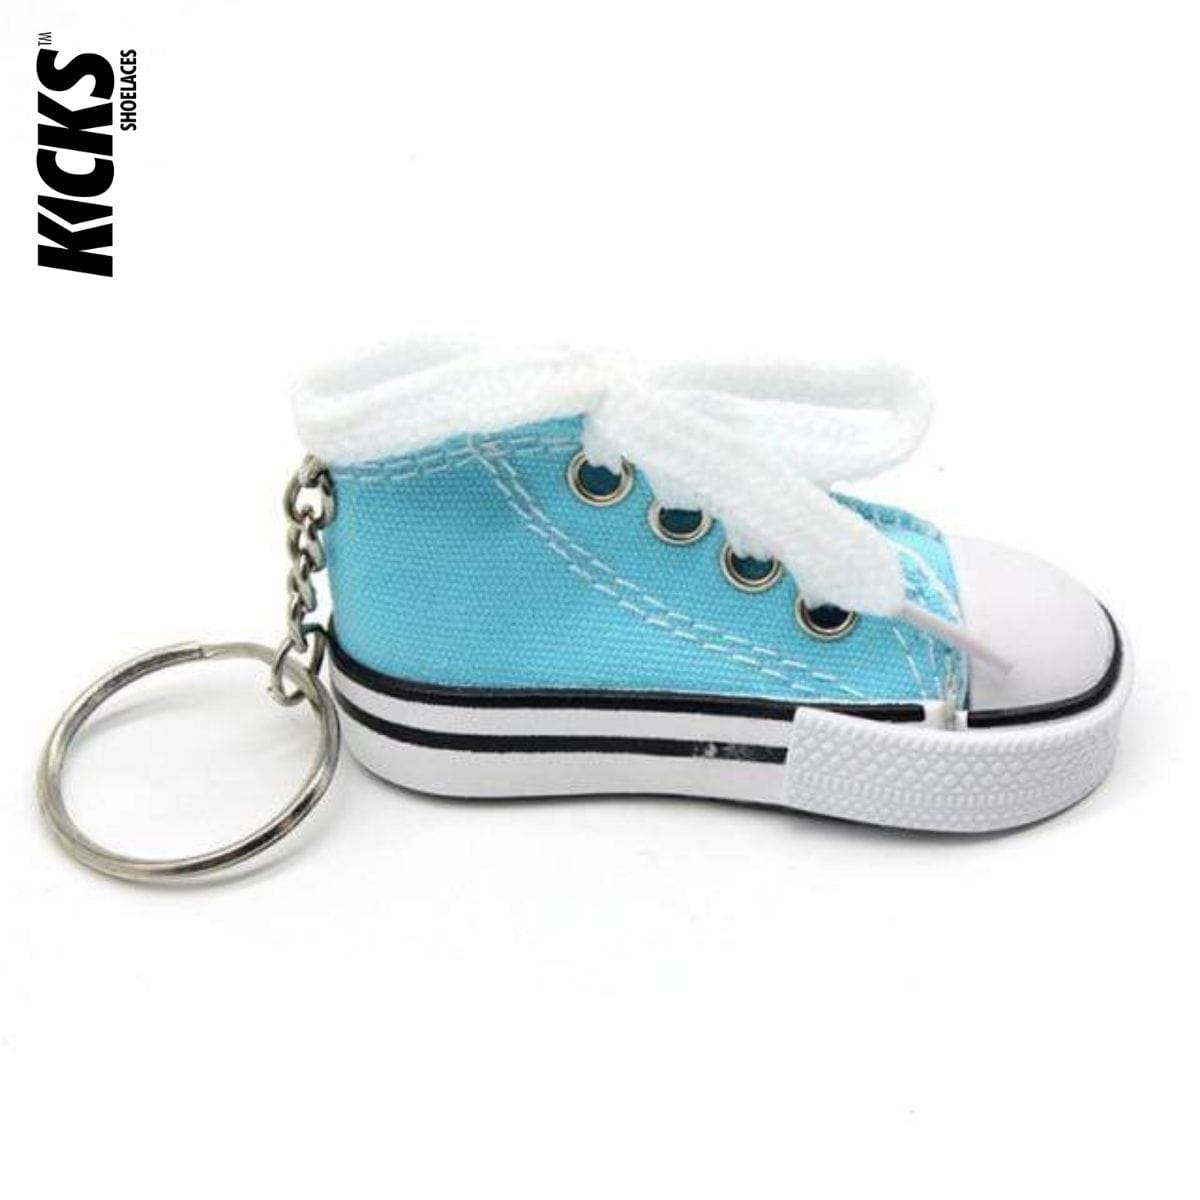 light-blue-high-top-sneaker-keychain-perfect-gift-best-charm-accessories.jpg  1200 × 1200px